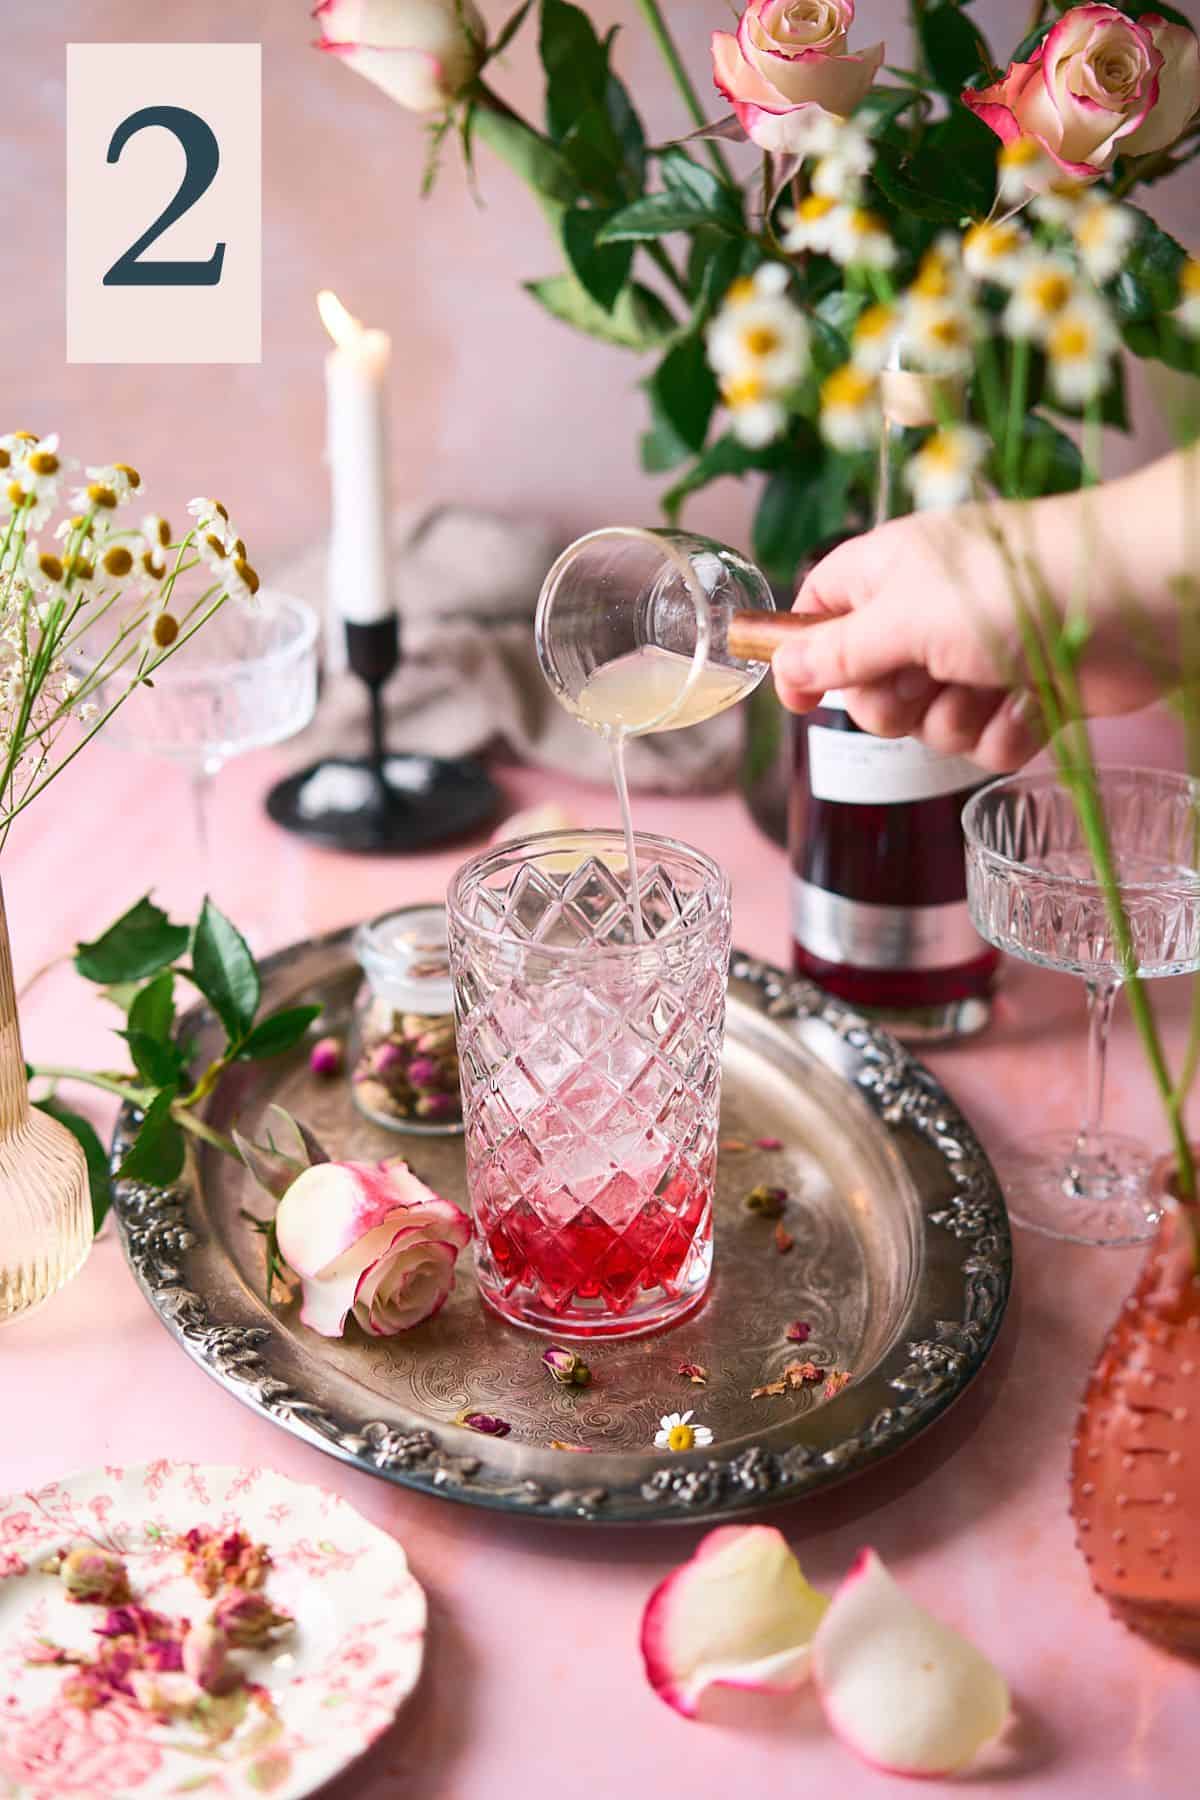 hand pouring lemon juice into a beautiful glass cocktail shaker with an intricate romantic scene of fresh roses, candles and flowers surrounding it.